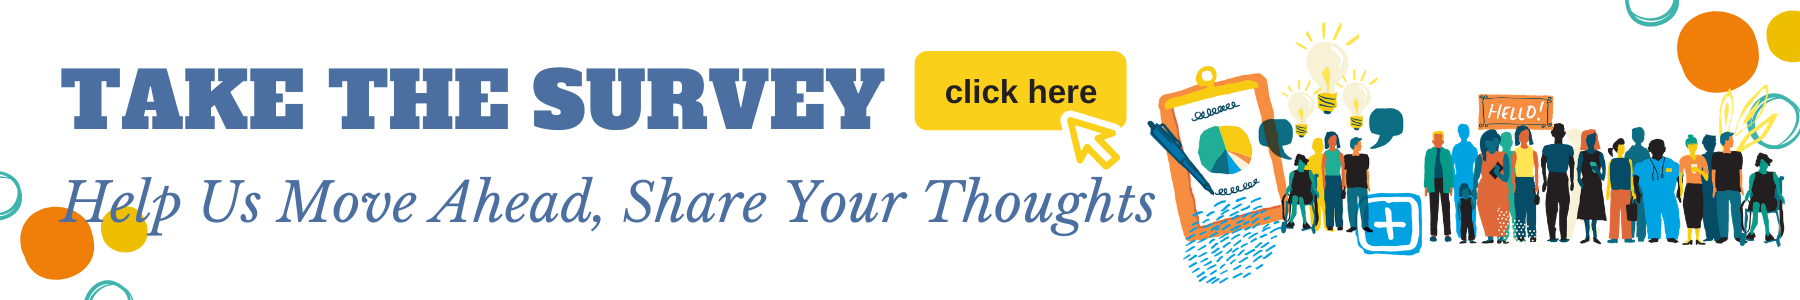 Take the survey. Help us move ahead, share your thoughts. Click here to take survey